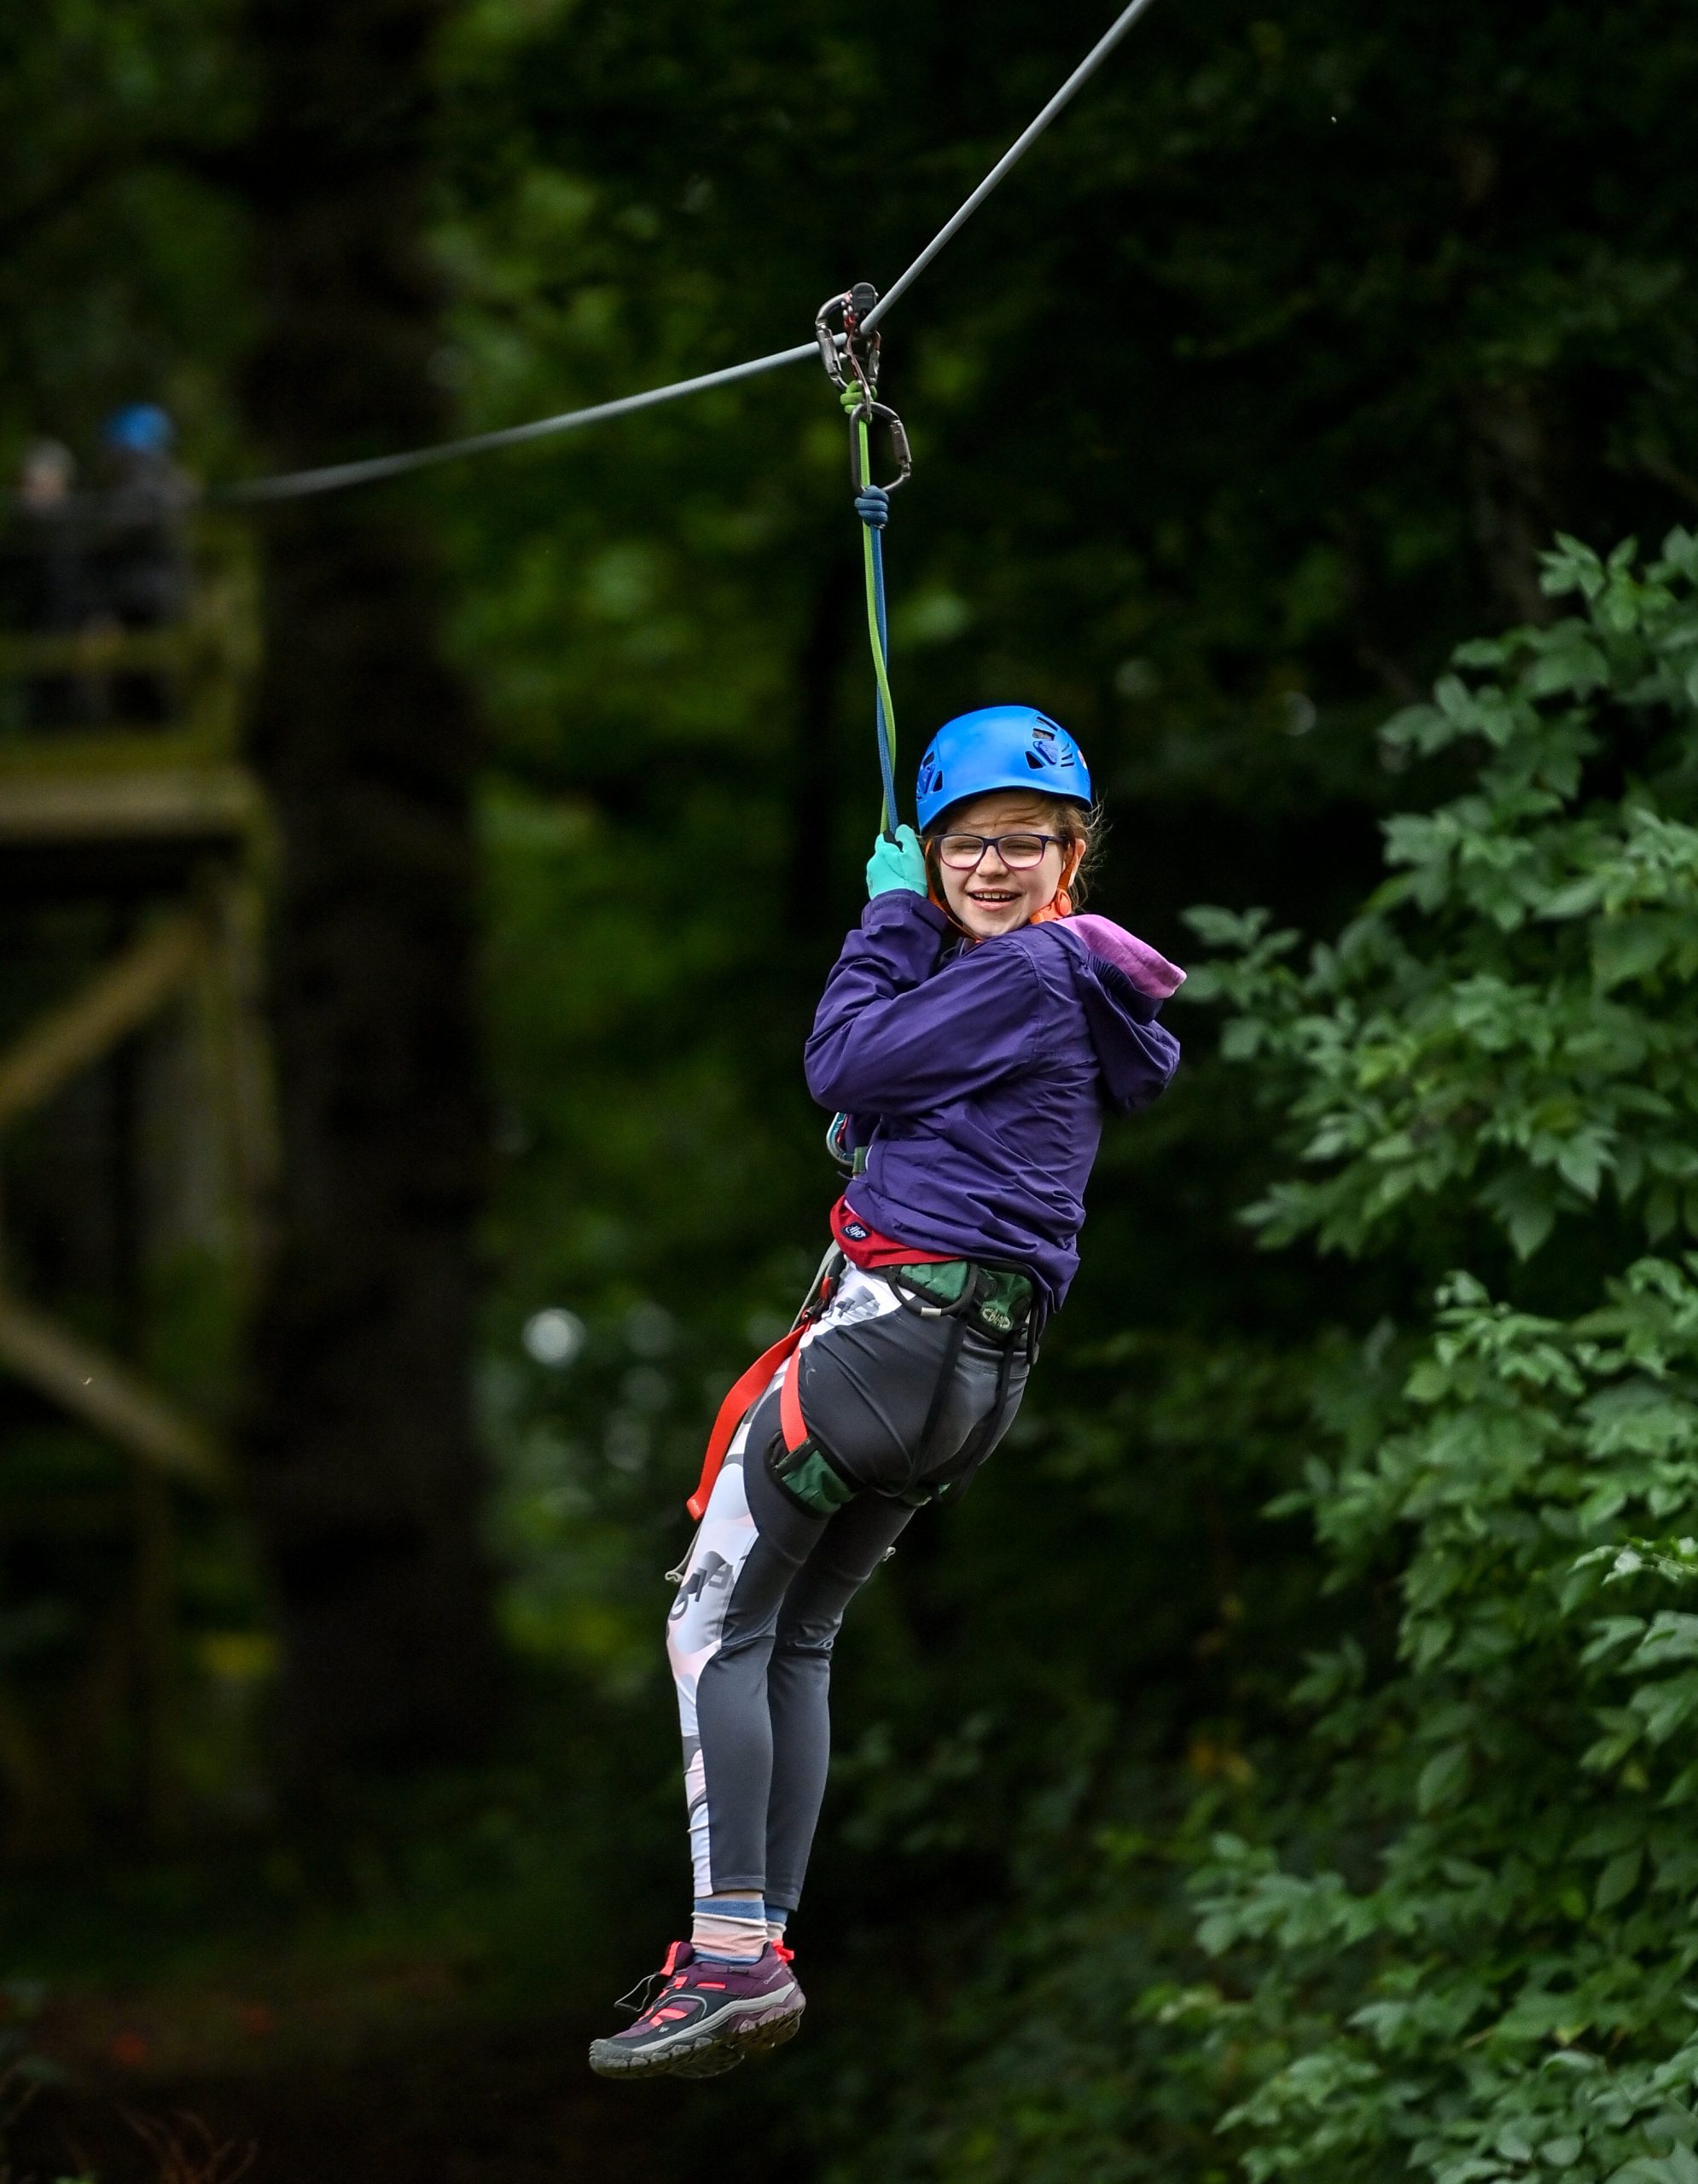 A girl on a zipline going through a forest smiles at the camera